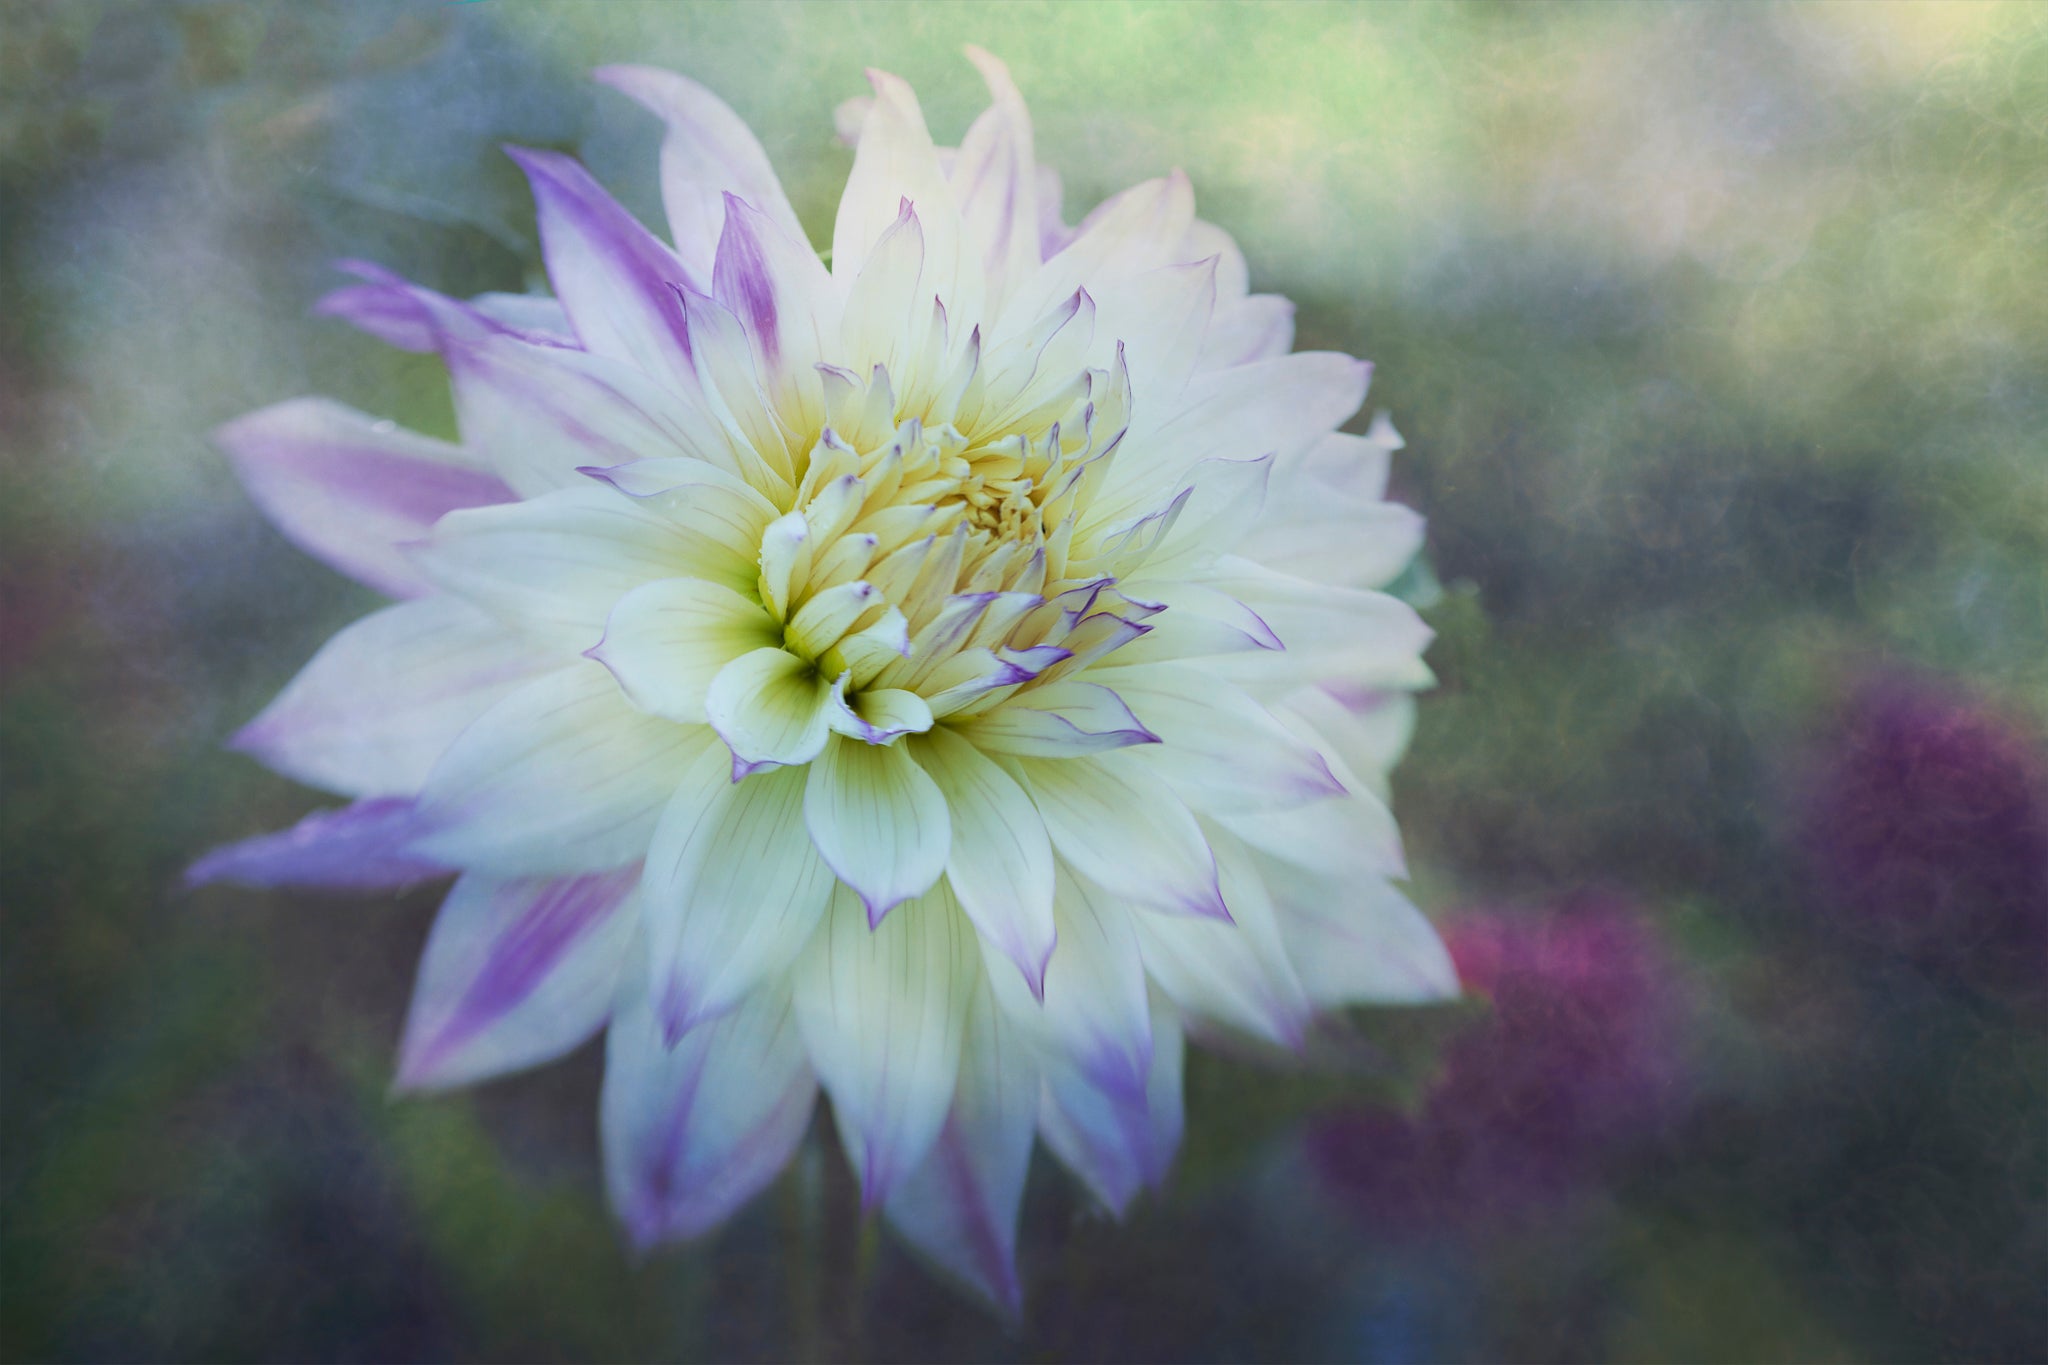 Photograph by Cameron Dreaux of a white and purple Dahlia against a misty morning backdrop. 